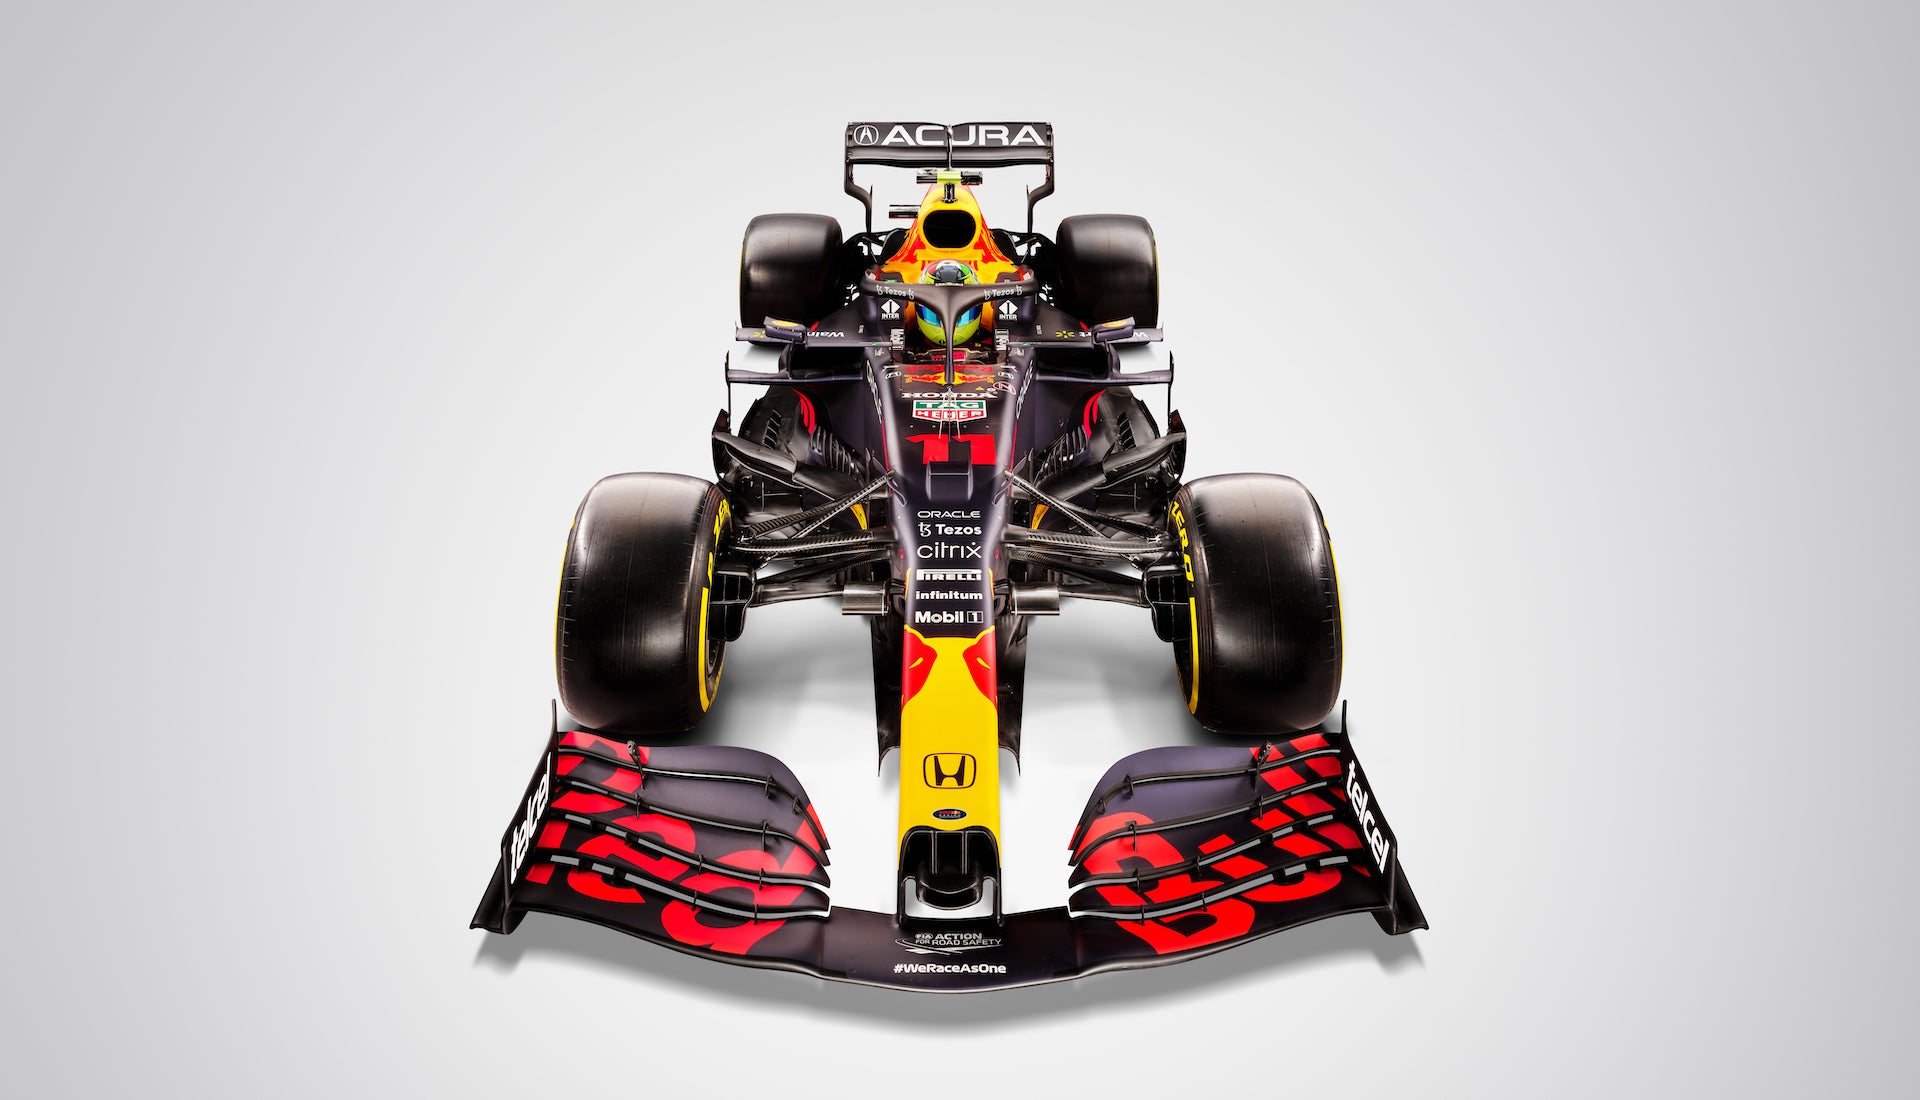 Acura Returns to F1 in Red Bull Livery for This Weekend's US Grand Prix